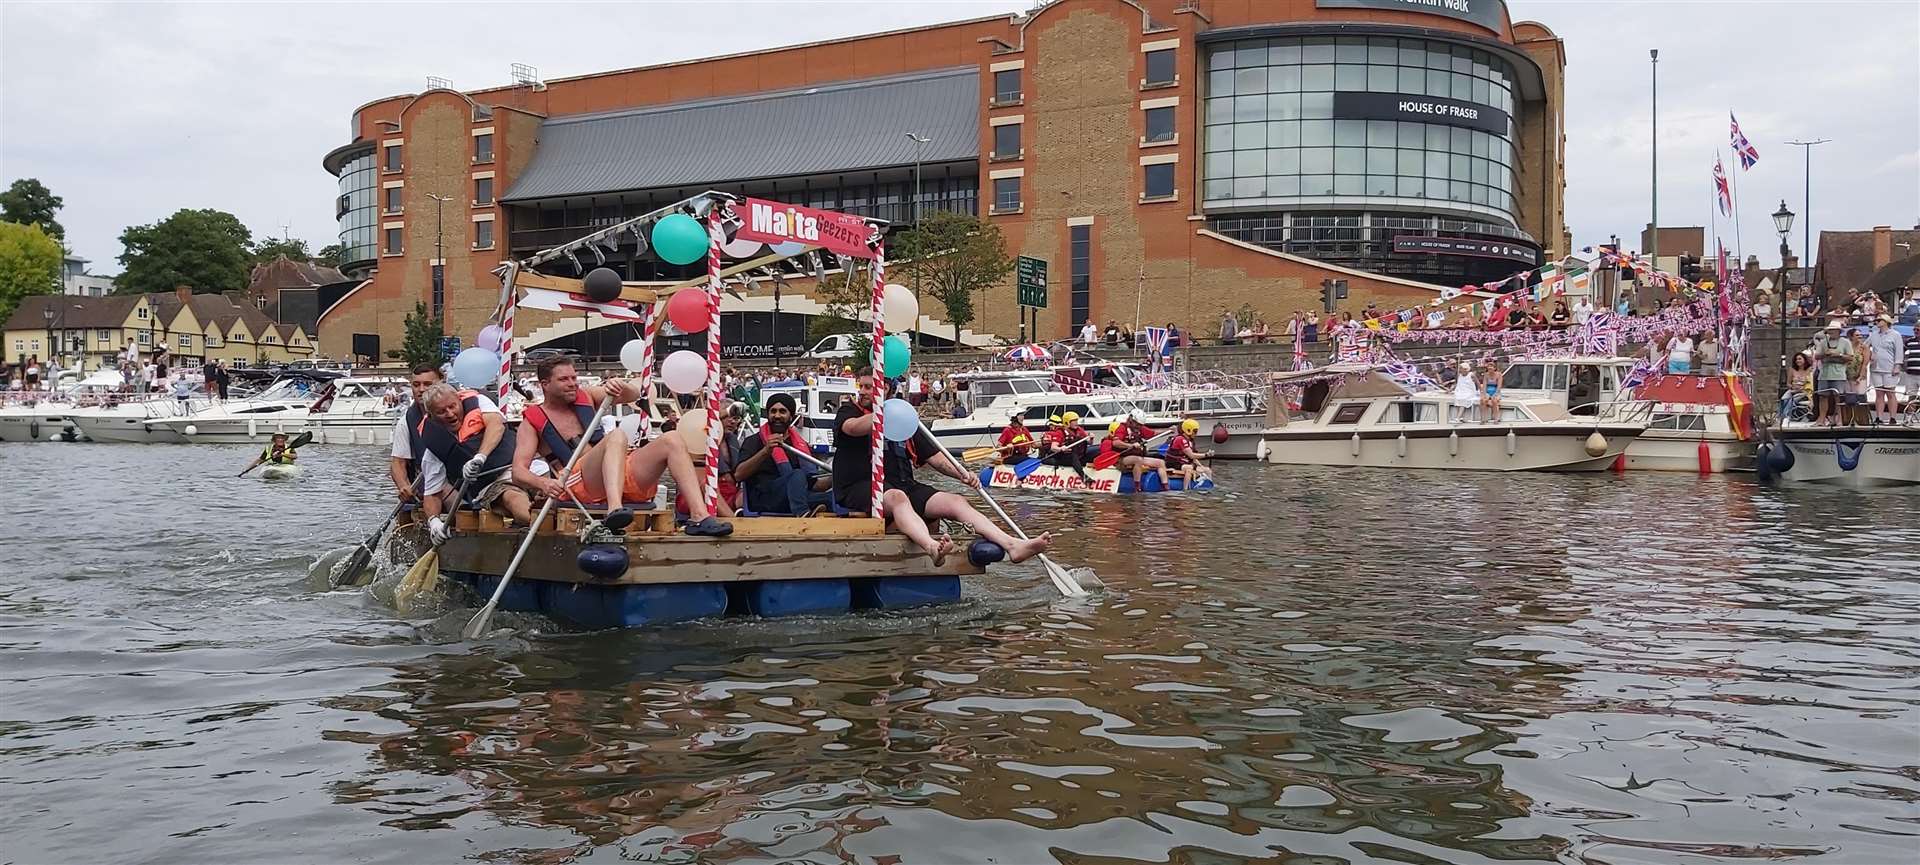 A scene from this summer's River Festival